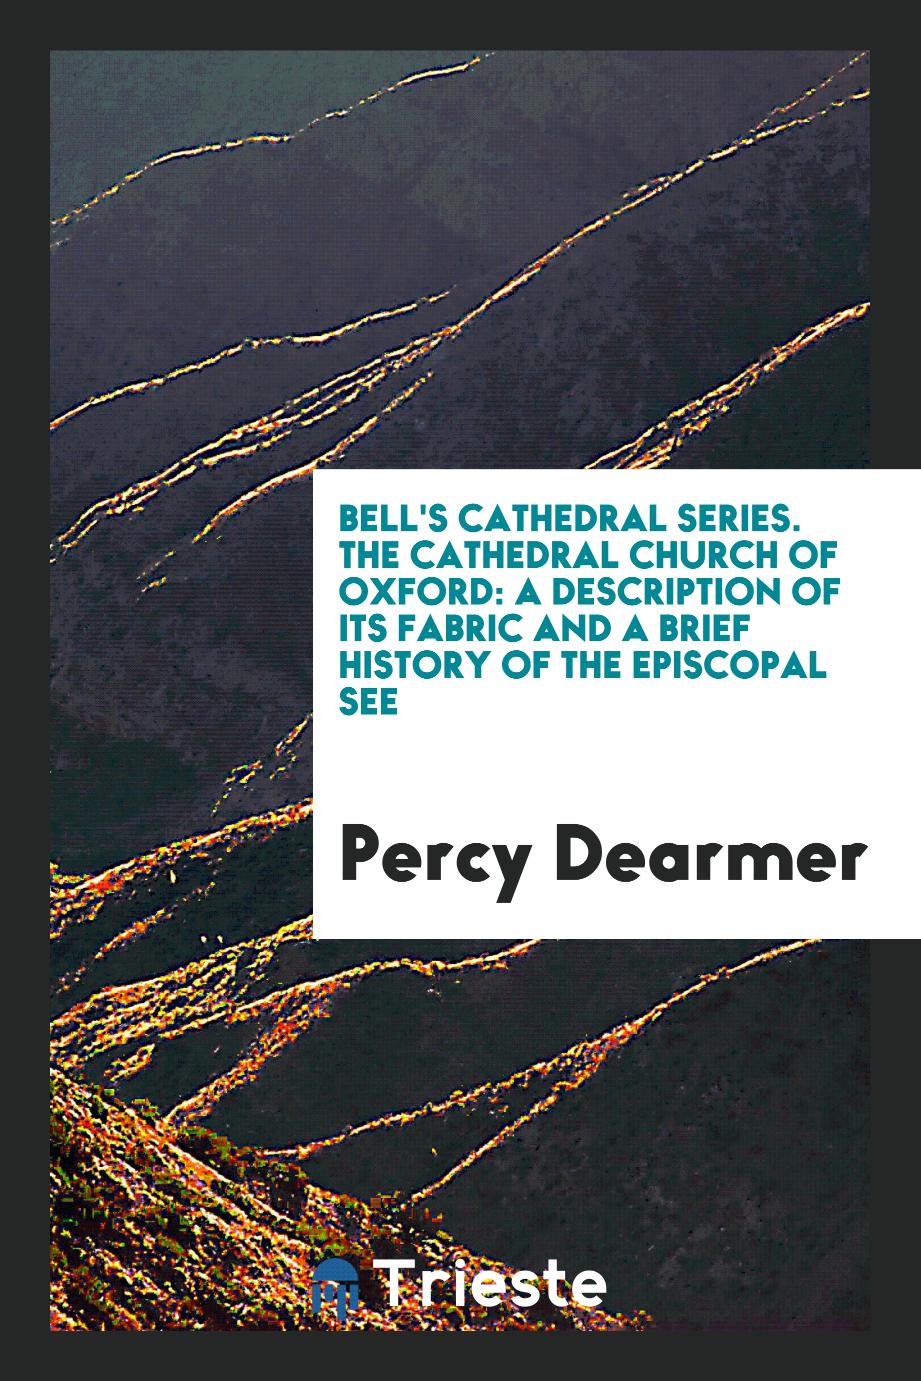 Bell's Cathedral Series. The Cathedral Church of Oxford: A Description of Its Fabric and a Brief History of the Episcopal See